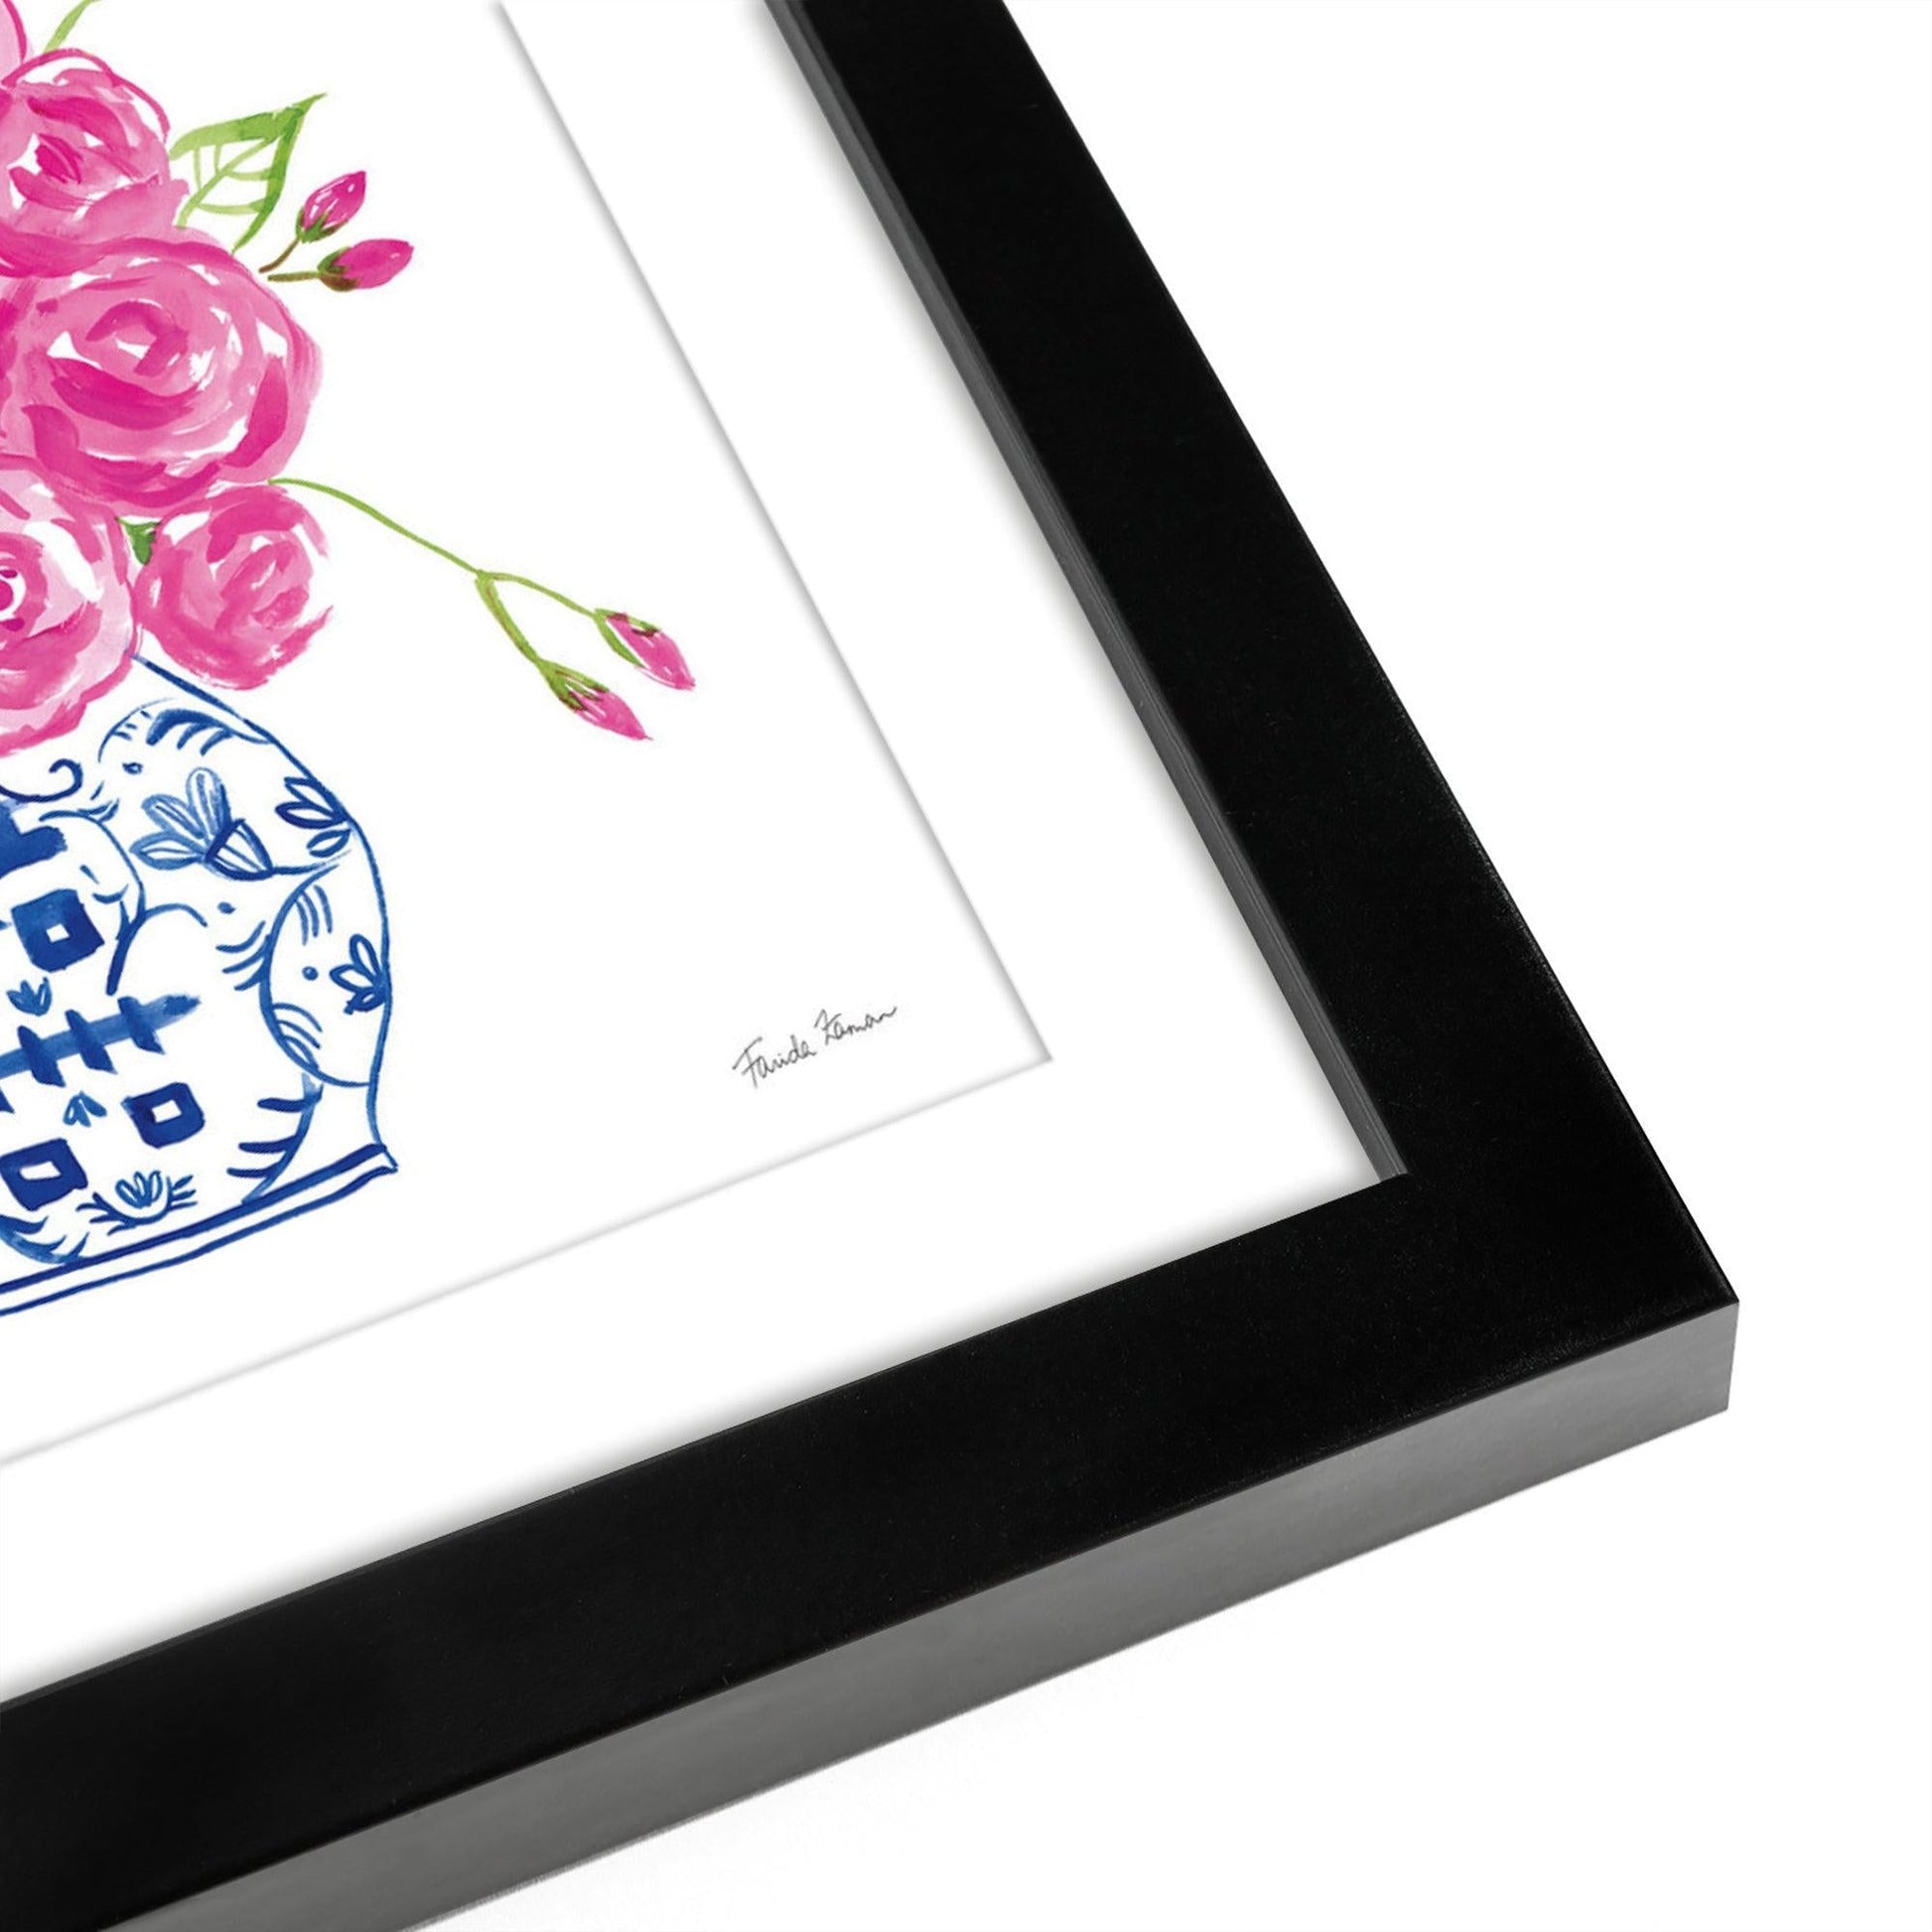 Roses On White - Set of 2 Framed Prints by Wild Apple - Americanflat